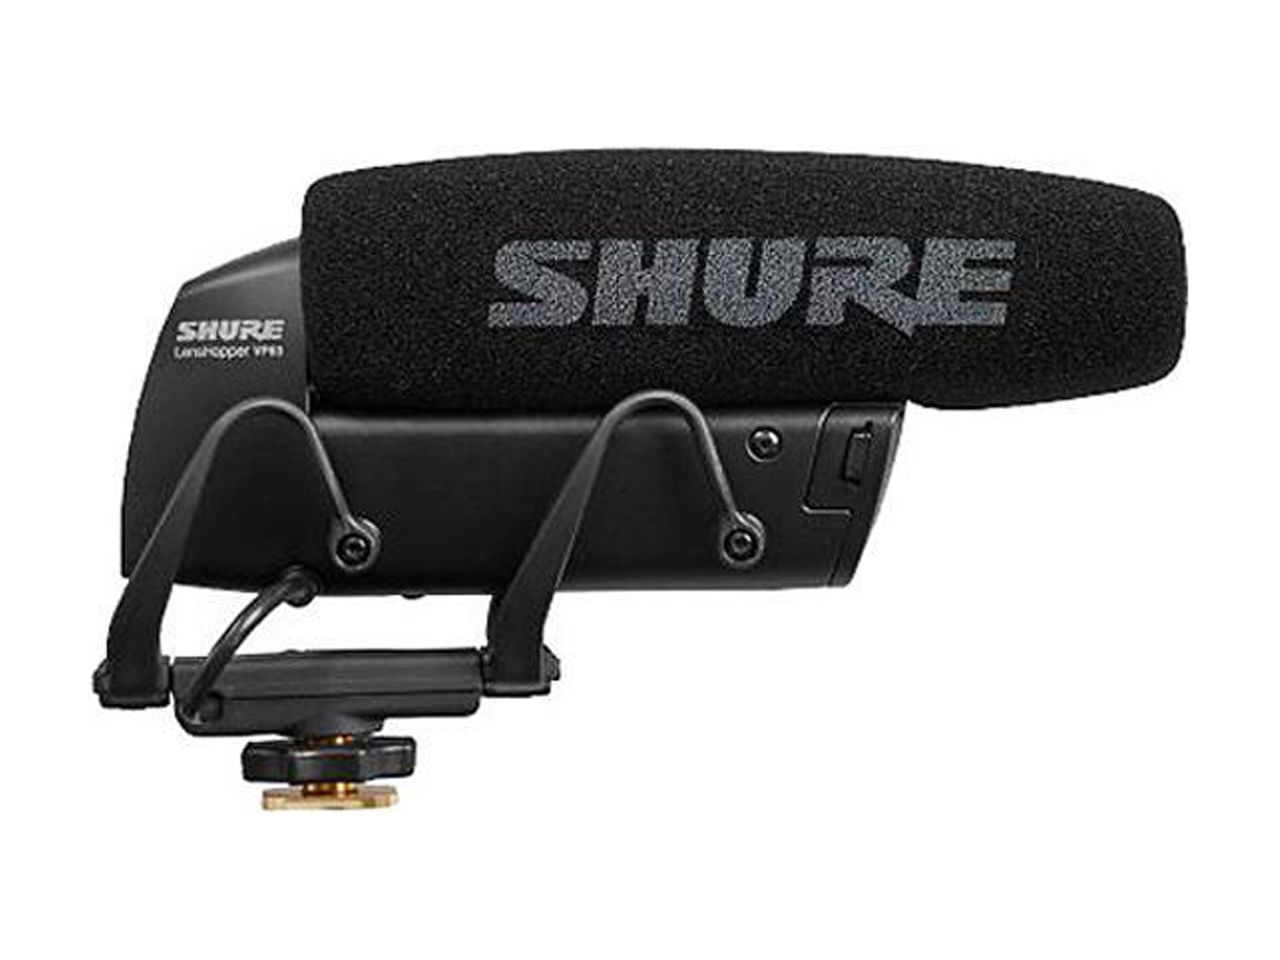 Shure VP83 LensHopper Camera-Mounted Condenser Microphone for Use with DSLR Cameras and HD Camcorders - image 2 of 14